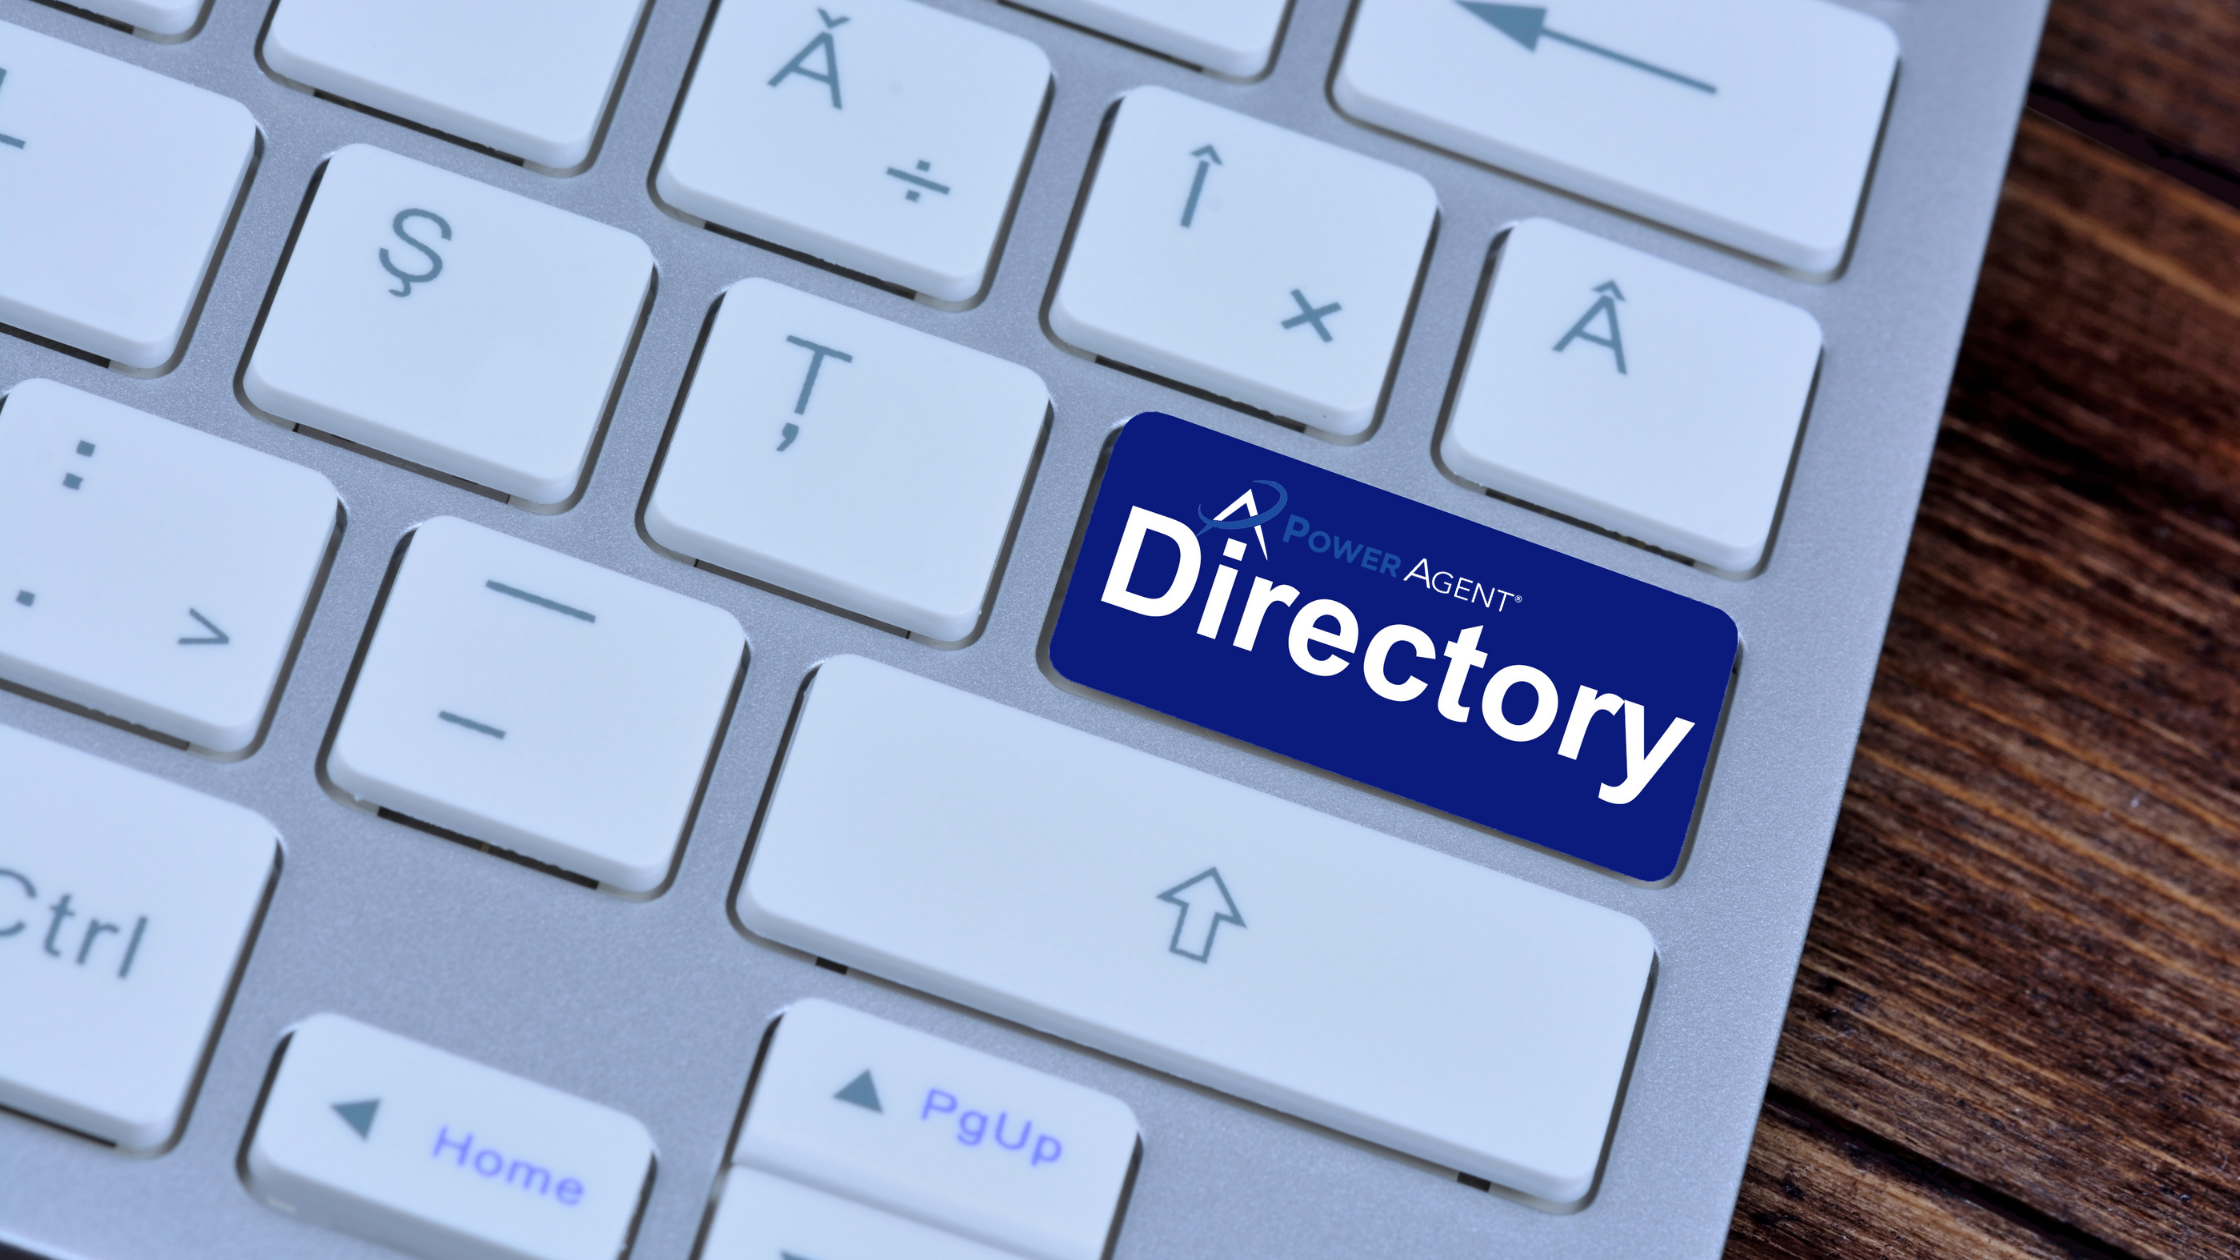 Power-Agent-Directory